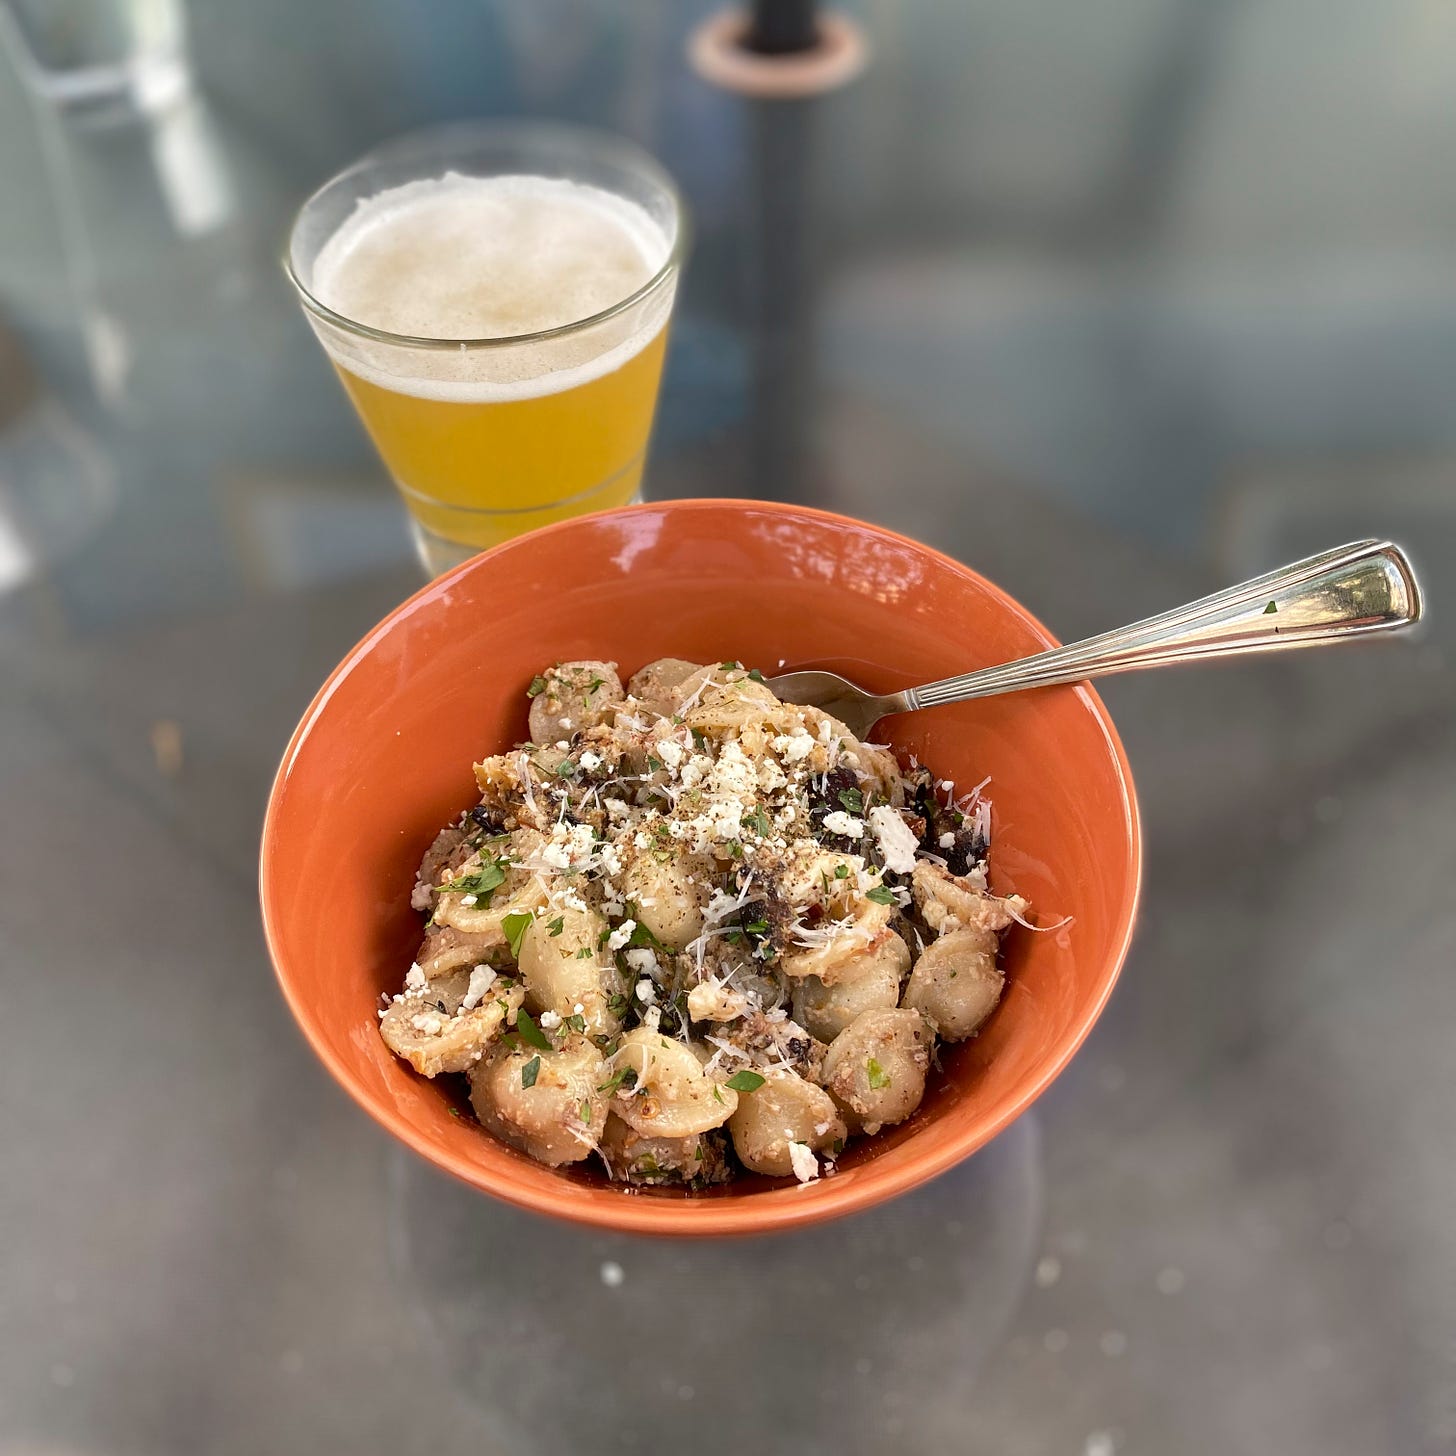 On an outdoor glass table, an orange bowl of the pasta salad described above, dusted with feta, parmesan, herbs, and black pepper. A fork sticks out of the bowl on the right, and a glass of hazy beer is visible in the background.